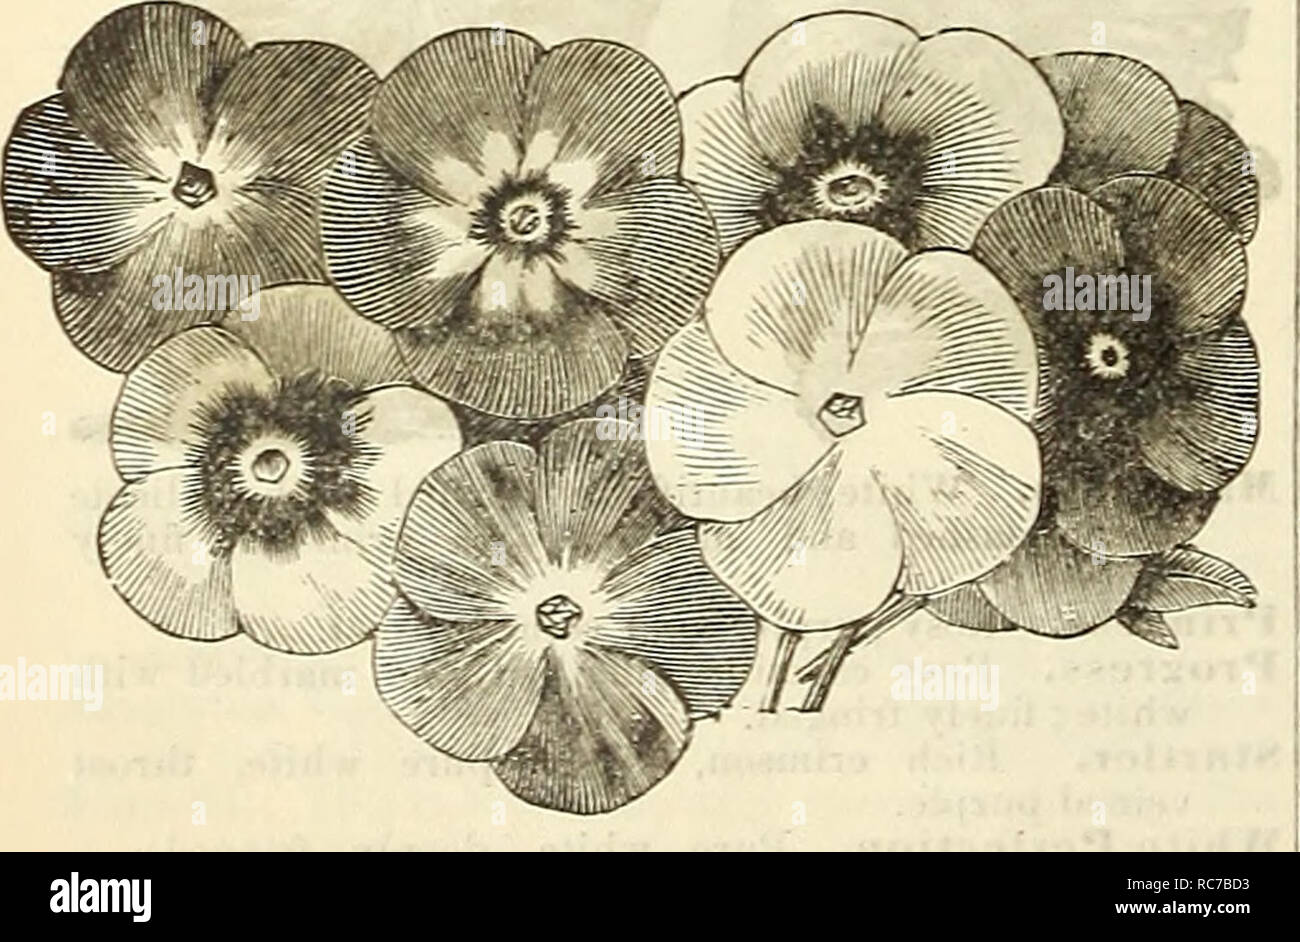 . Dreer's garden calendar for 1887. Seeds Catalogs; Nursery stock Catalogs; Gardening Catalogs; Flowers Seeds Catalogs. NEW DOUBLE PETUNIA. MRS. G. DAWSON COLEMAN. An entirely new and distinct shape, and without exaggeration the finest double white Petunia ever sent out. The flowers are large, very double, deeply fringed and of a pure white color. We sent out this variety in Sb6 with an assured feeling that it would meet with the approbation of plant lovers. The many flattering testimonials we have received from all parts of the country, combined with our own observation of its merits, have l Stock Photo